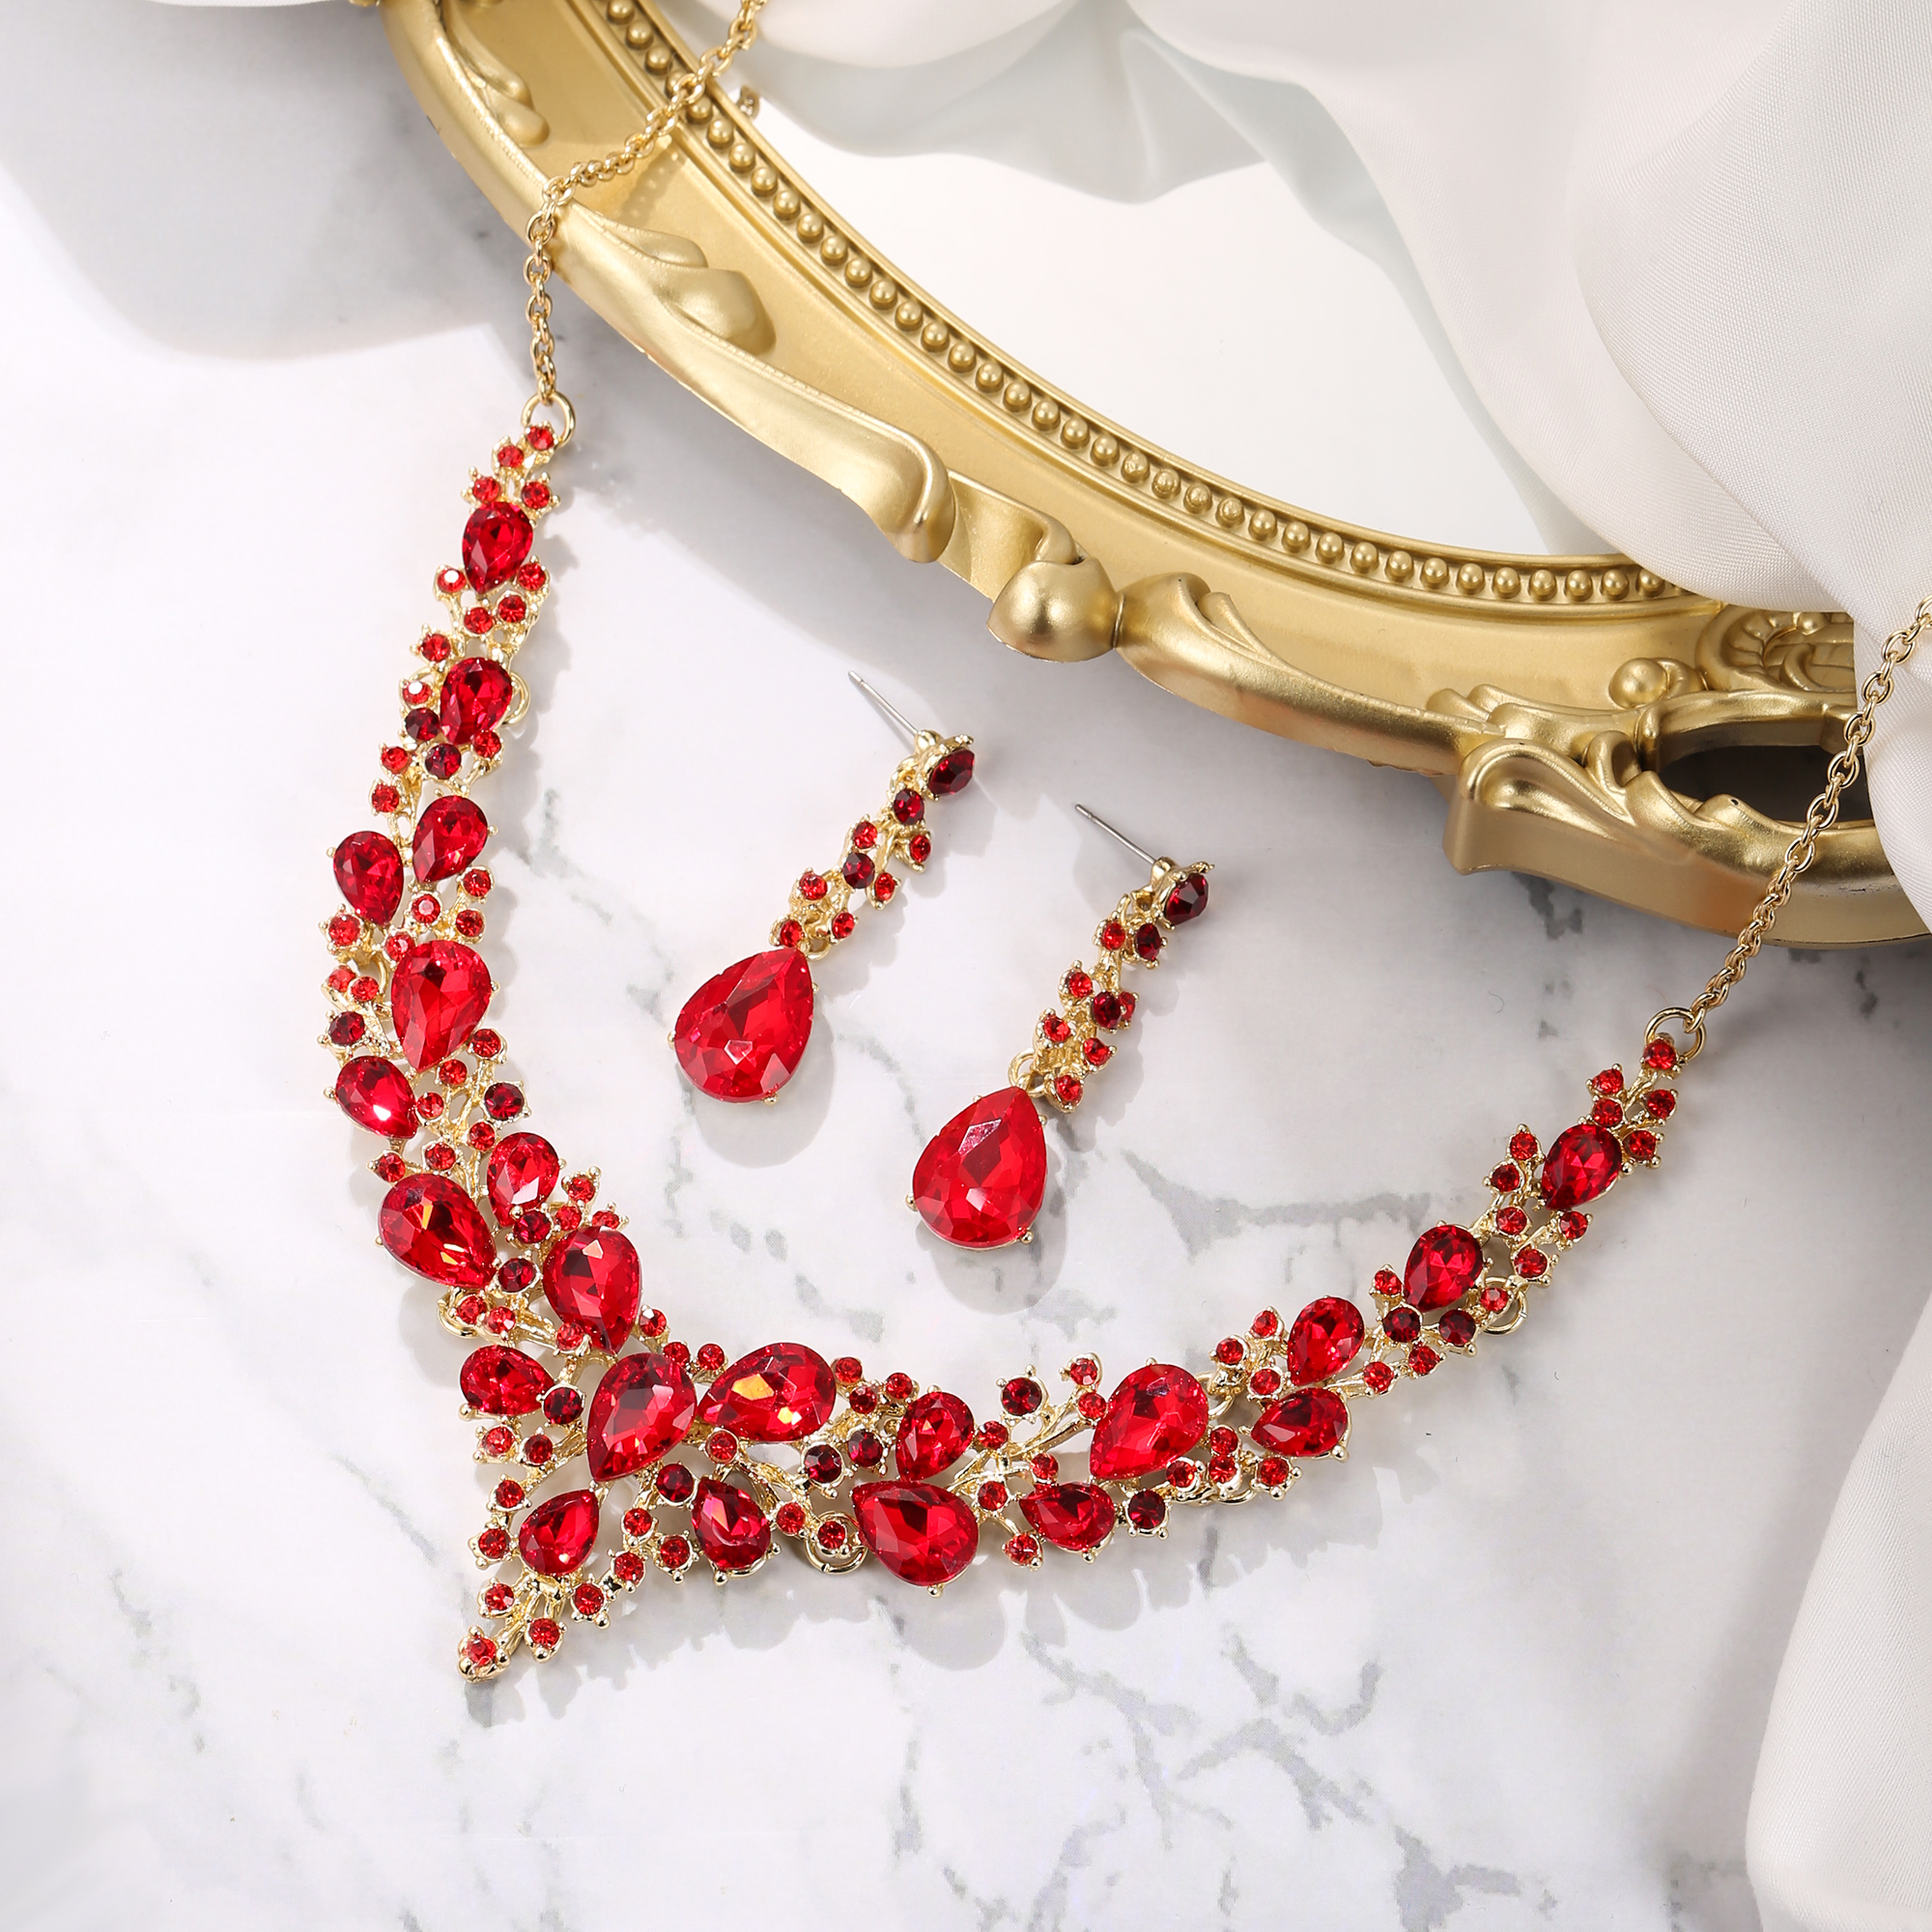 Wedure Wedding Bridal Necklace Earrings Jewelry Set for Women, Austrian Crystal Teardrop Cluster Statement Necklace Dangle Earrings Set Ruby Color Gold-Tone - image 3 of 5